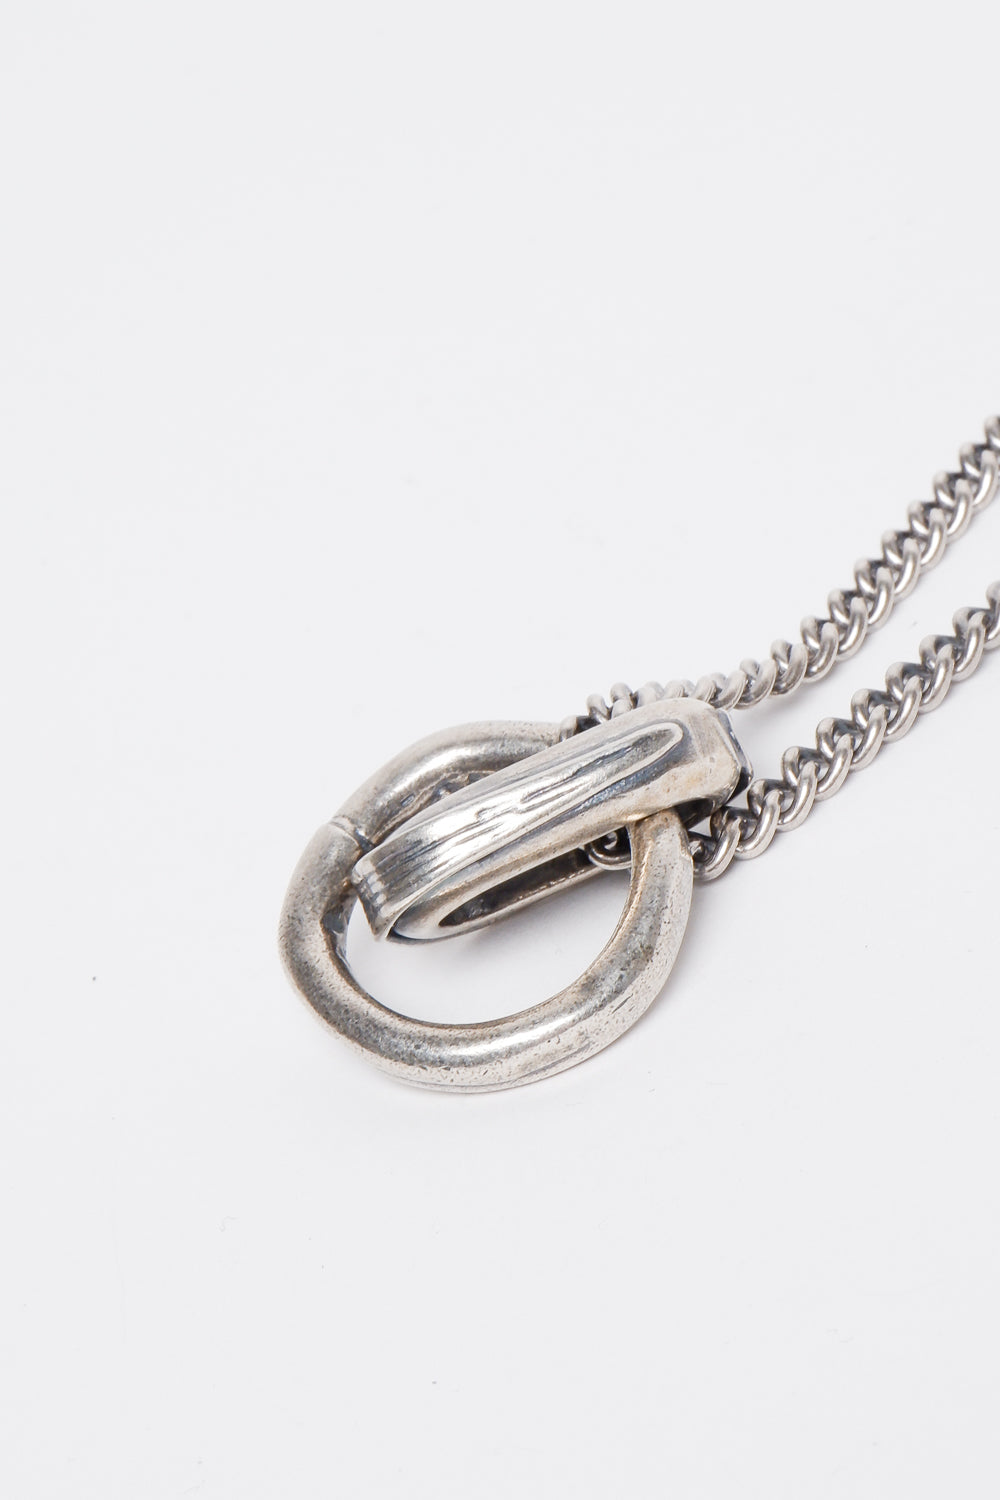 Buy the GOTI CN2126 Necklace at Intro. Spend £50 for free UK delivery. Official stockists. We ship worldwide.